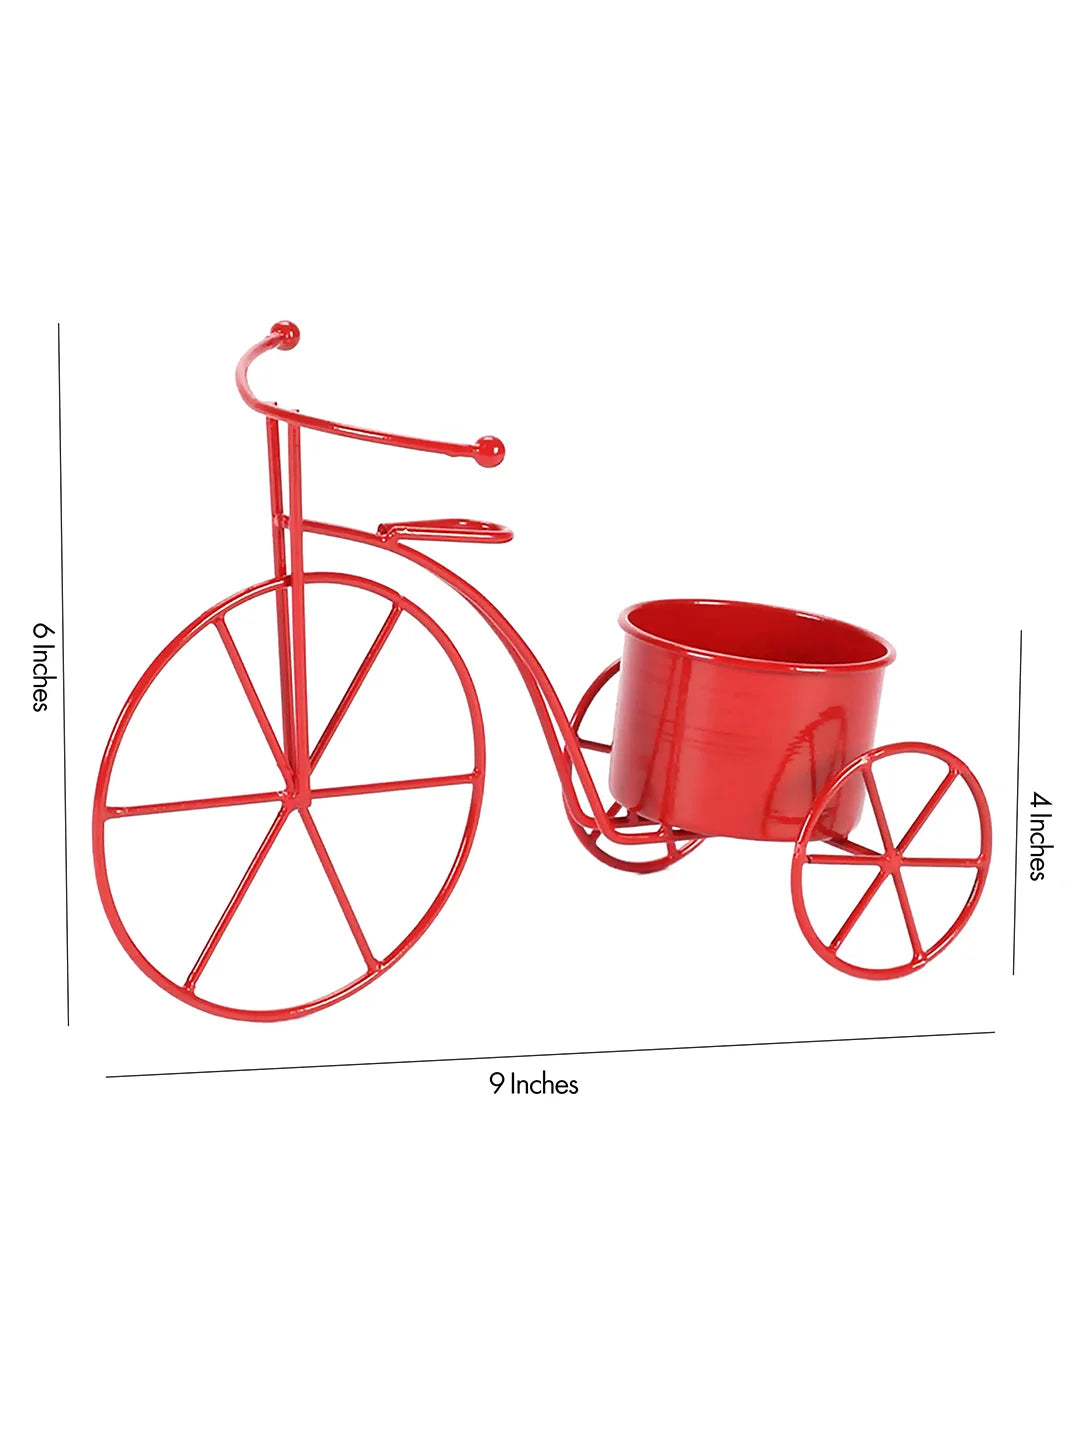 Small Cycle Planter Red